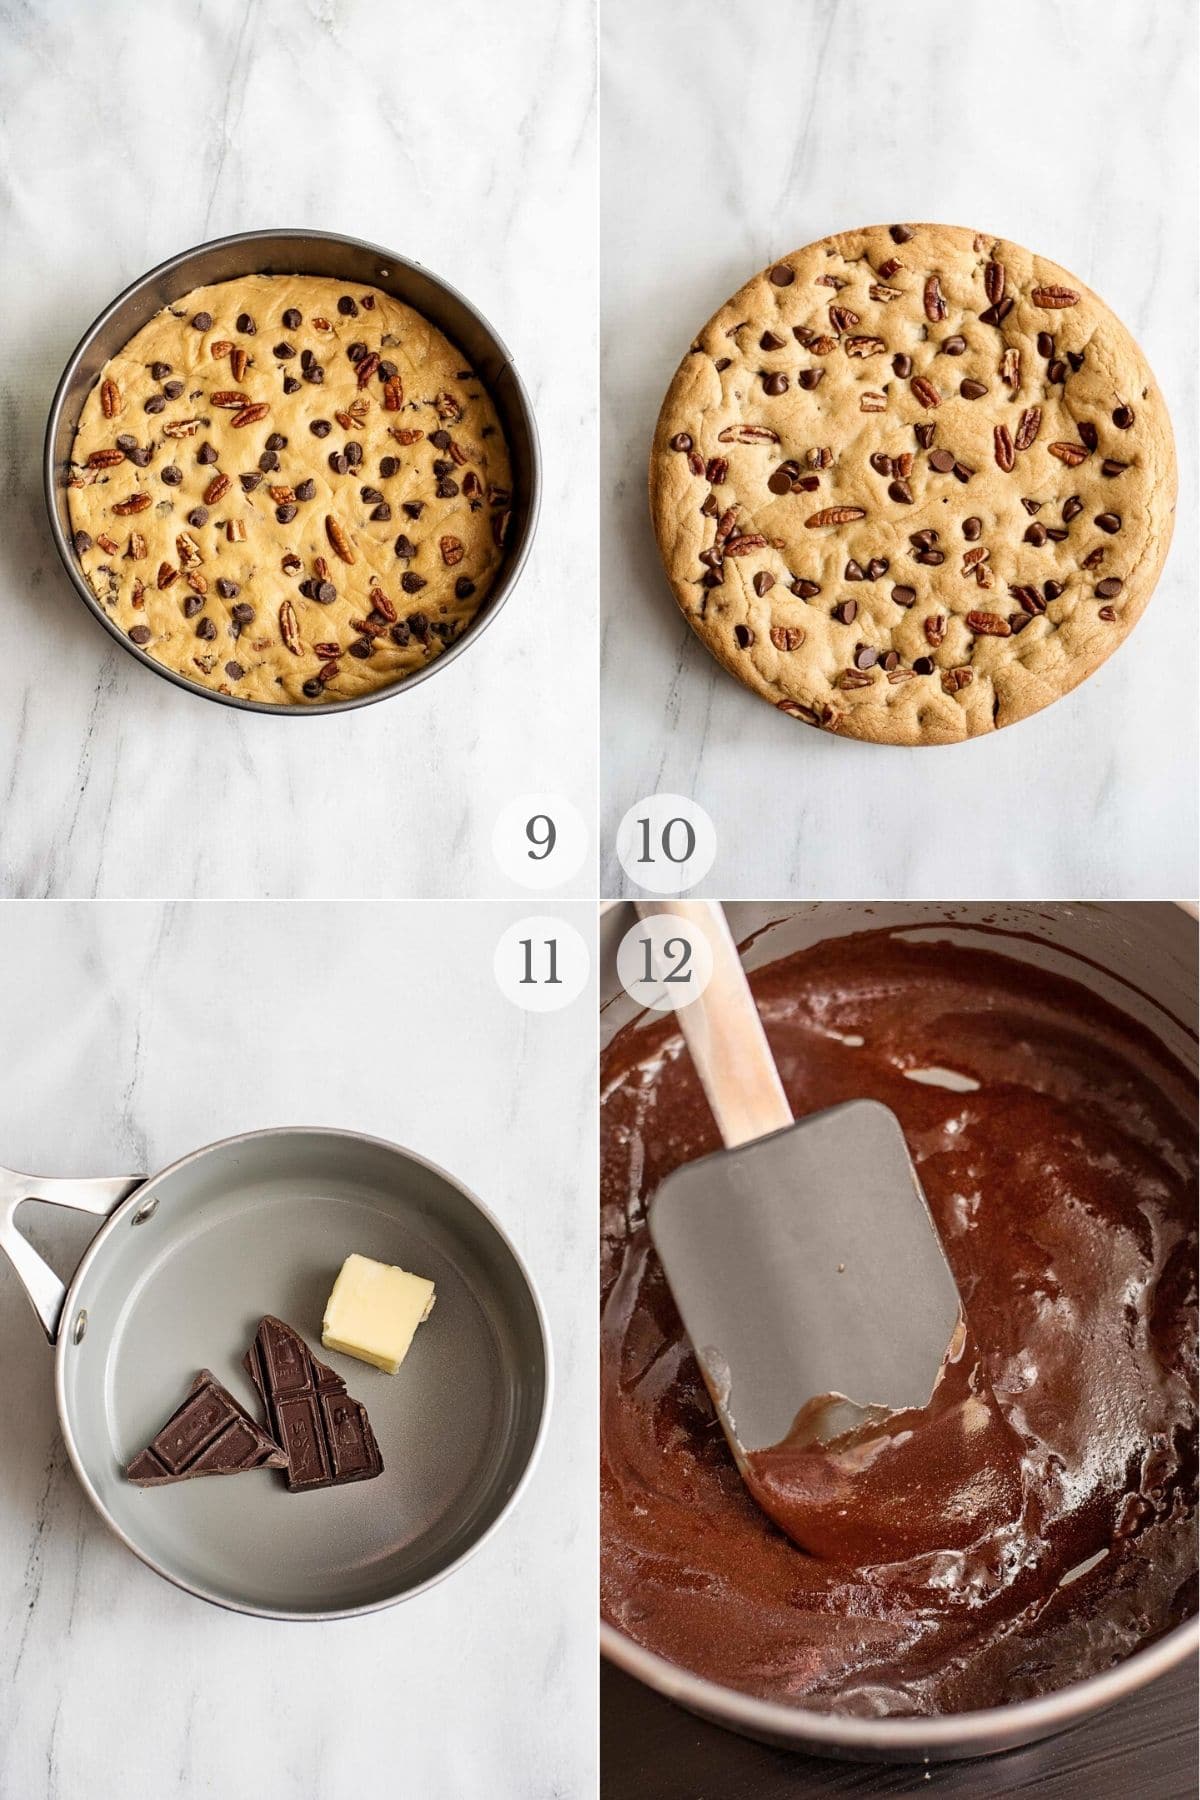 Cookie cake recipe steps collage 9-12